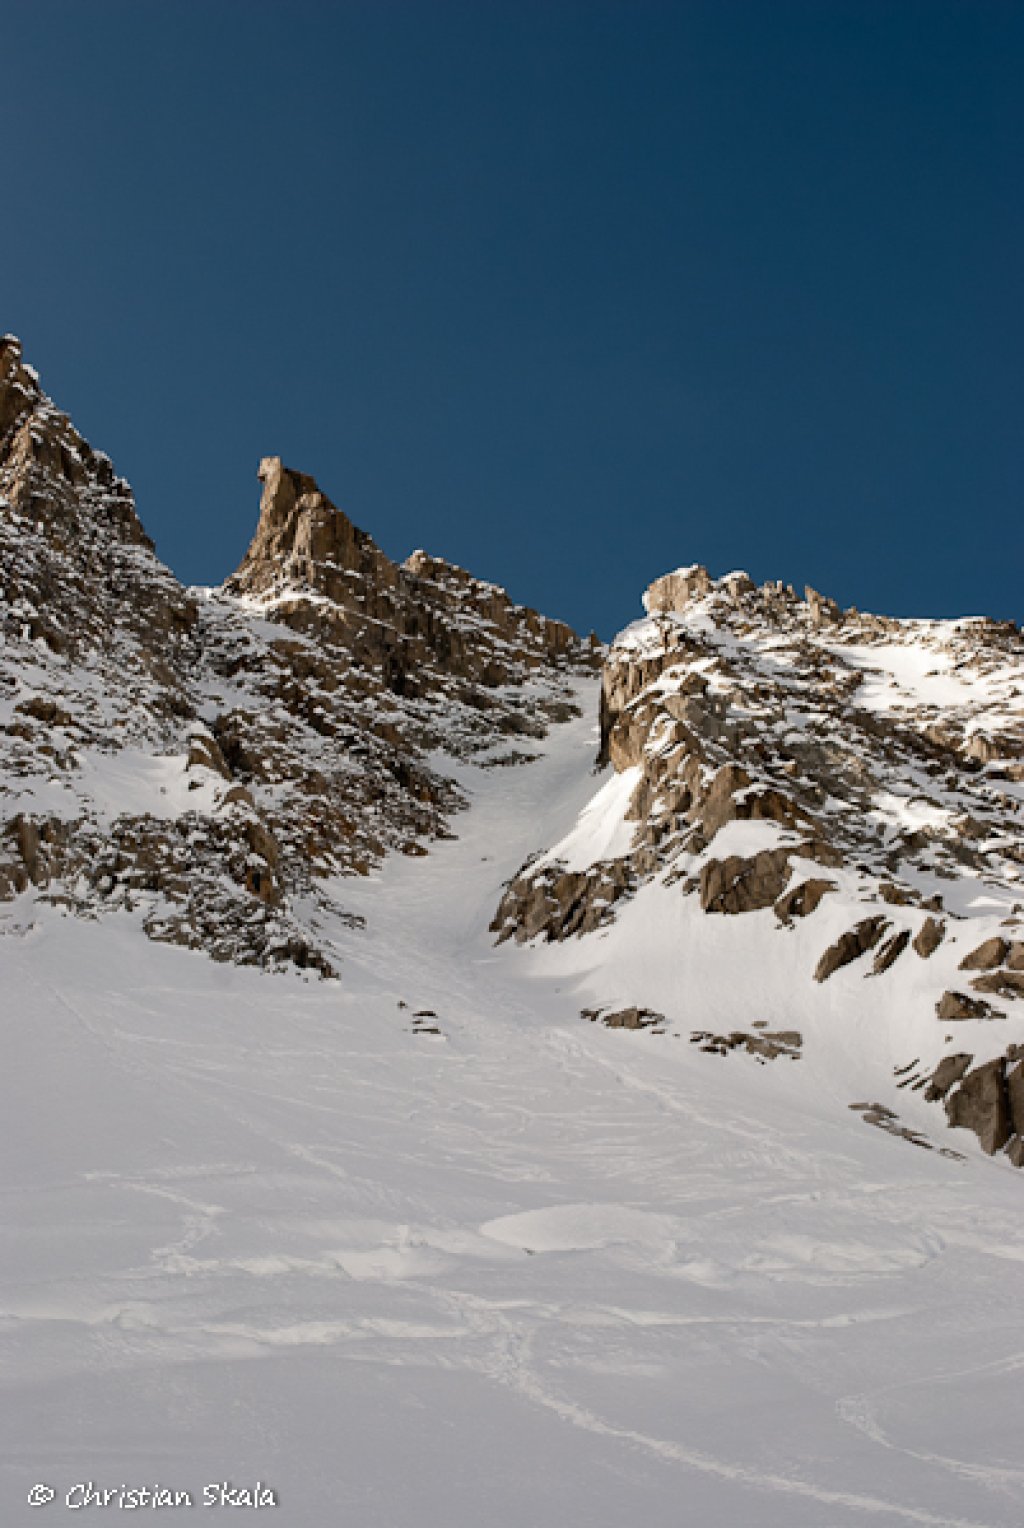 The Chevalier Couloir from below